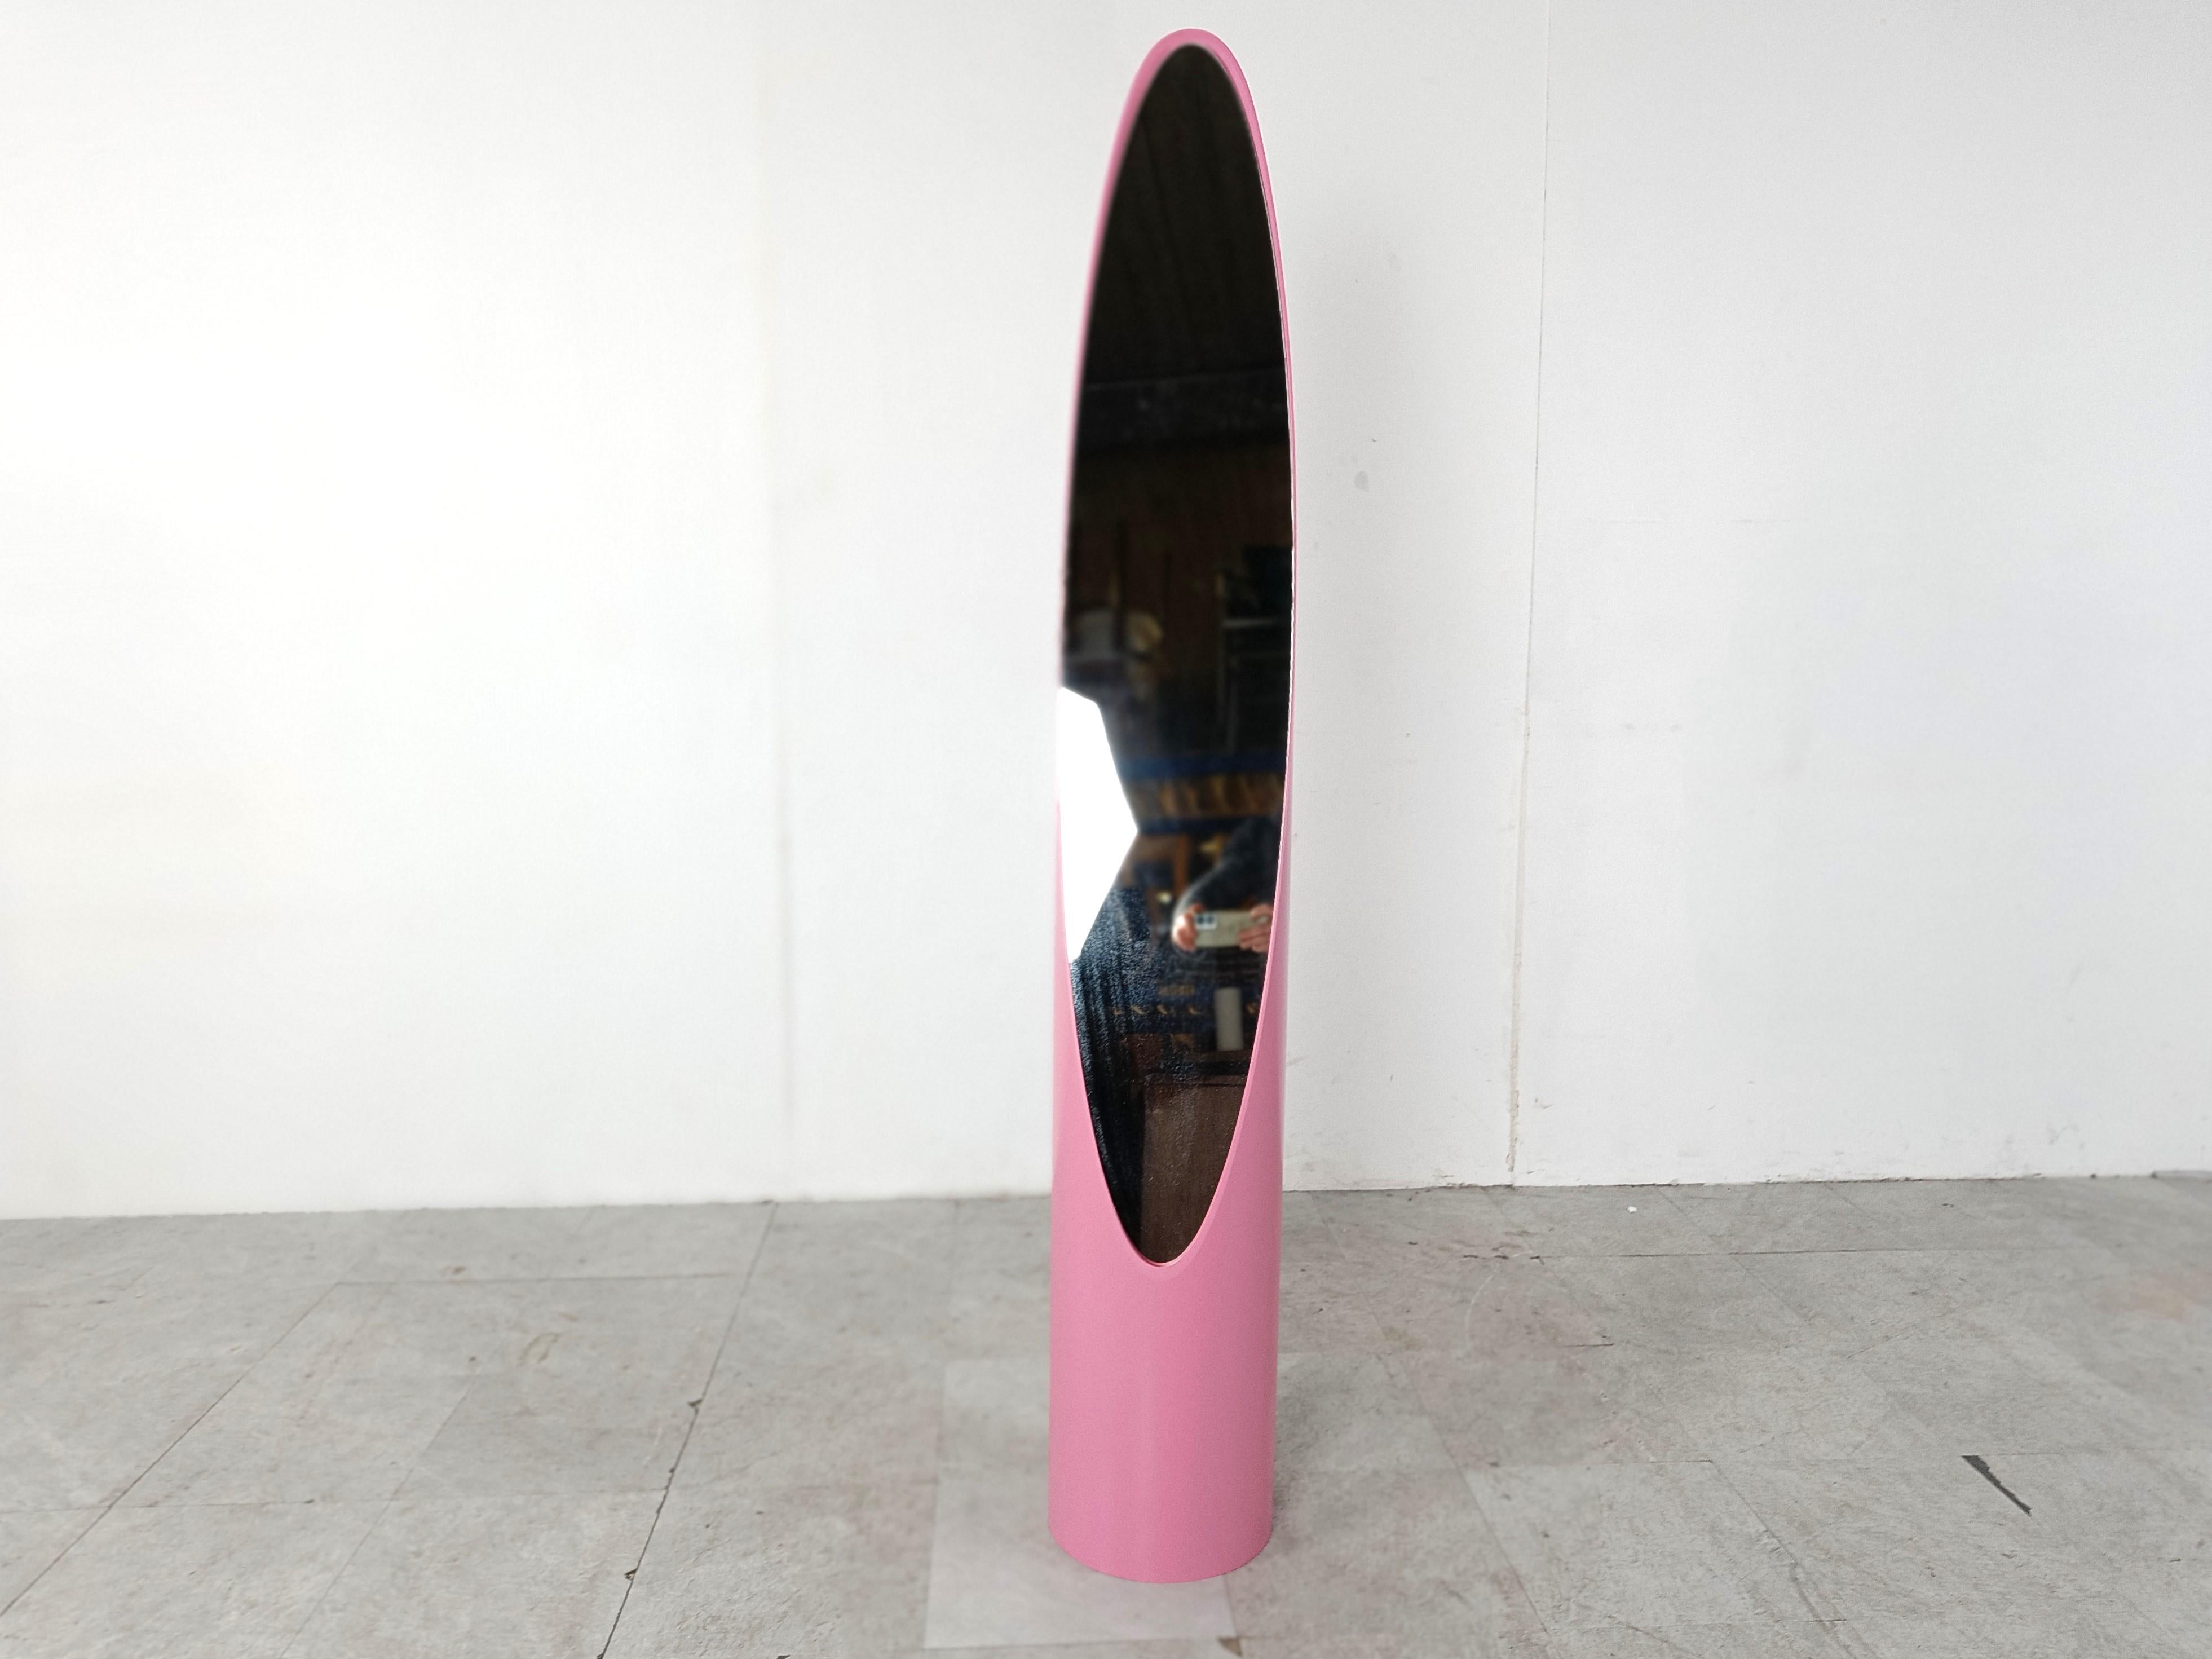 Vintage 'Lipstick' floor mirror designed by Rodolfo Bonetto

good condition.

Great timeless design

1970s - Italy

Dimensions:
Height: 164cm/64.56